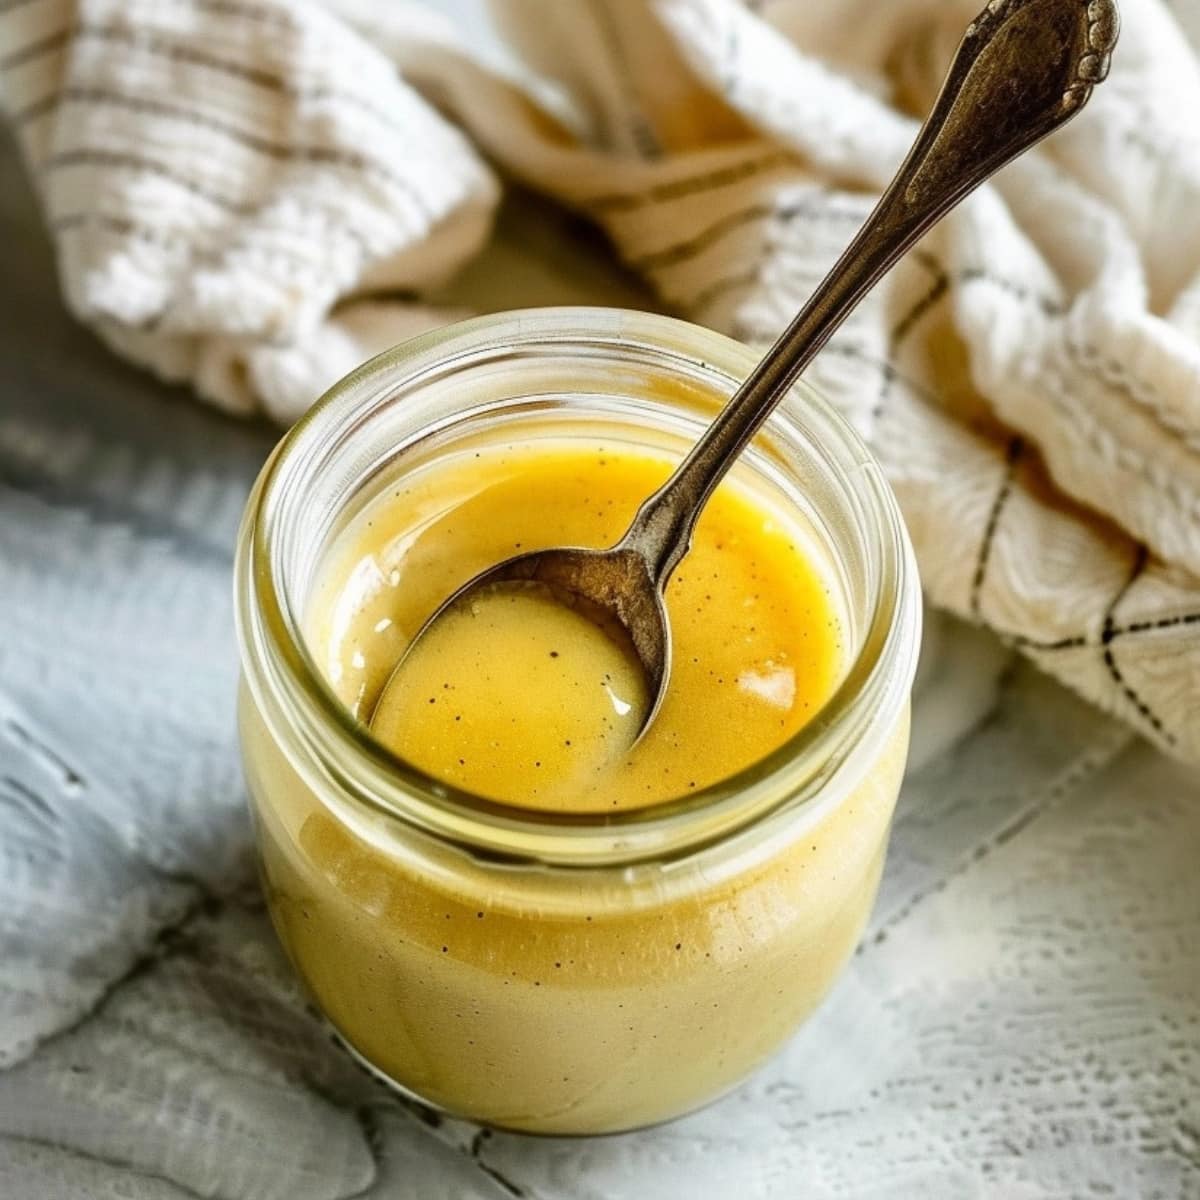 Spoon dipped in a jar with honey mustard sauce.